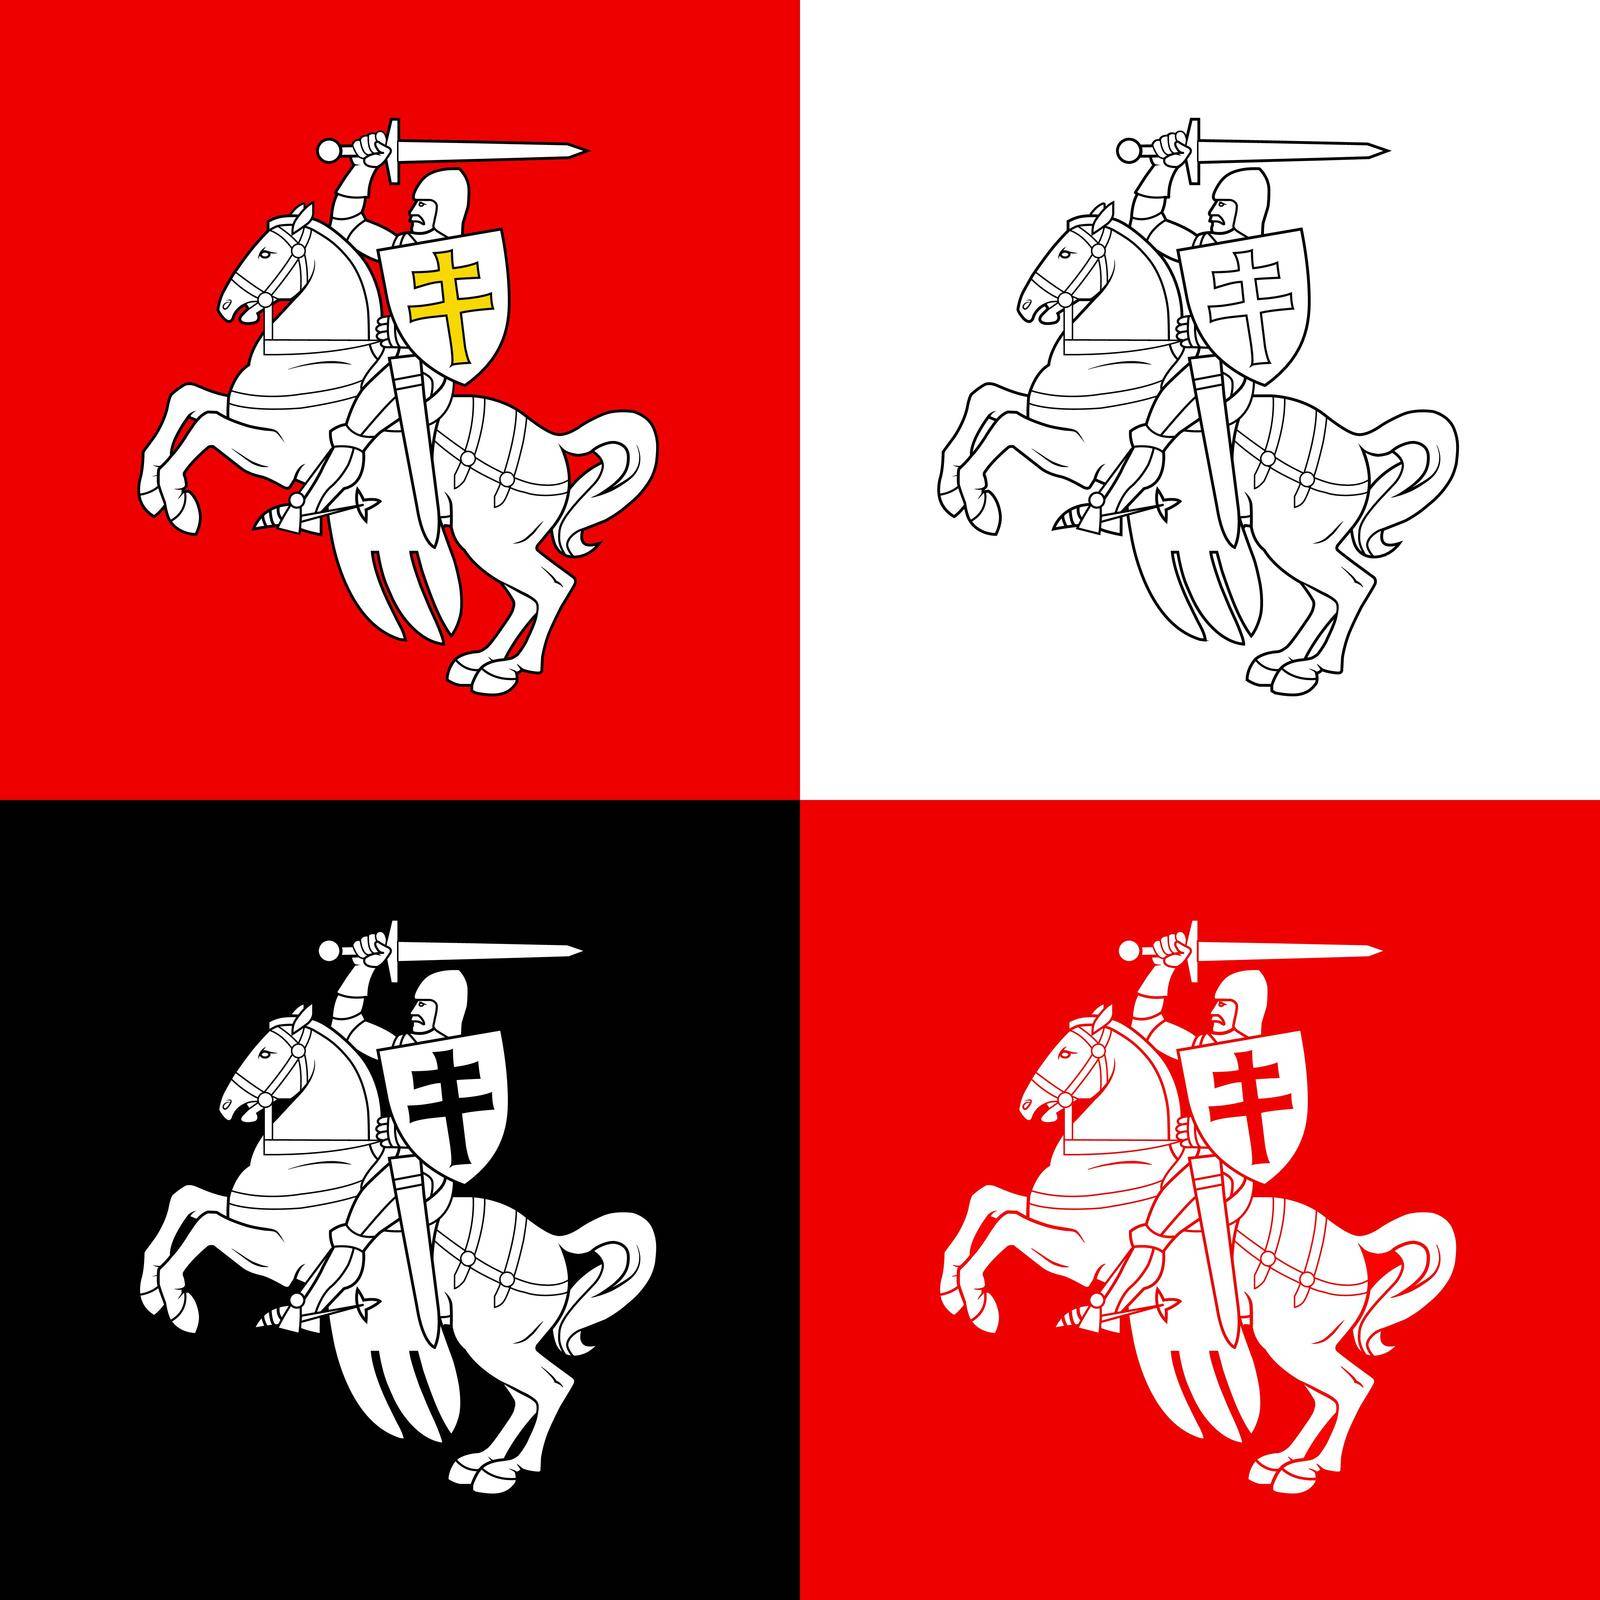 Variants of images of a rider on a horse from the coat of arms of the Republic of Belarus in 1991 - 1994. Vector illustration.